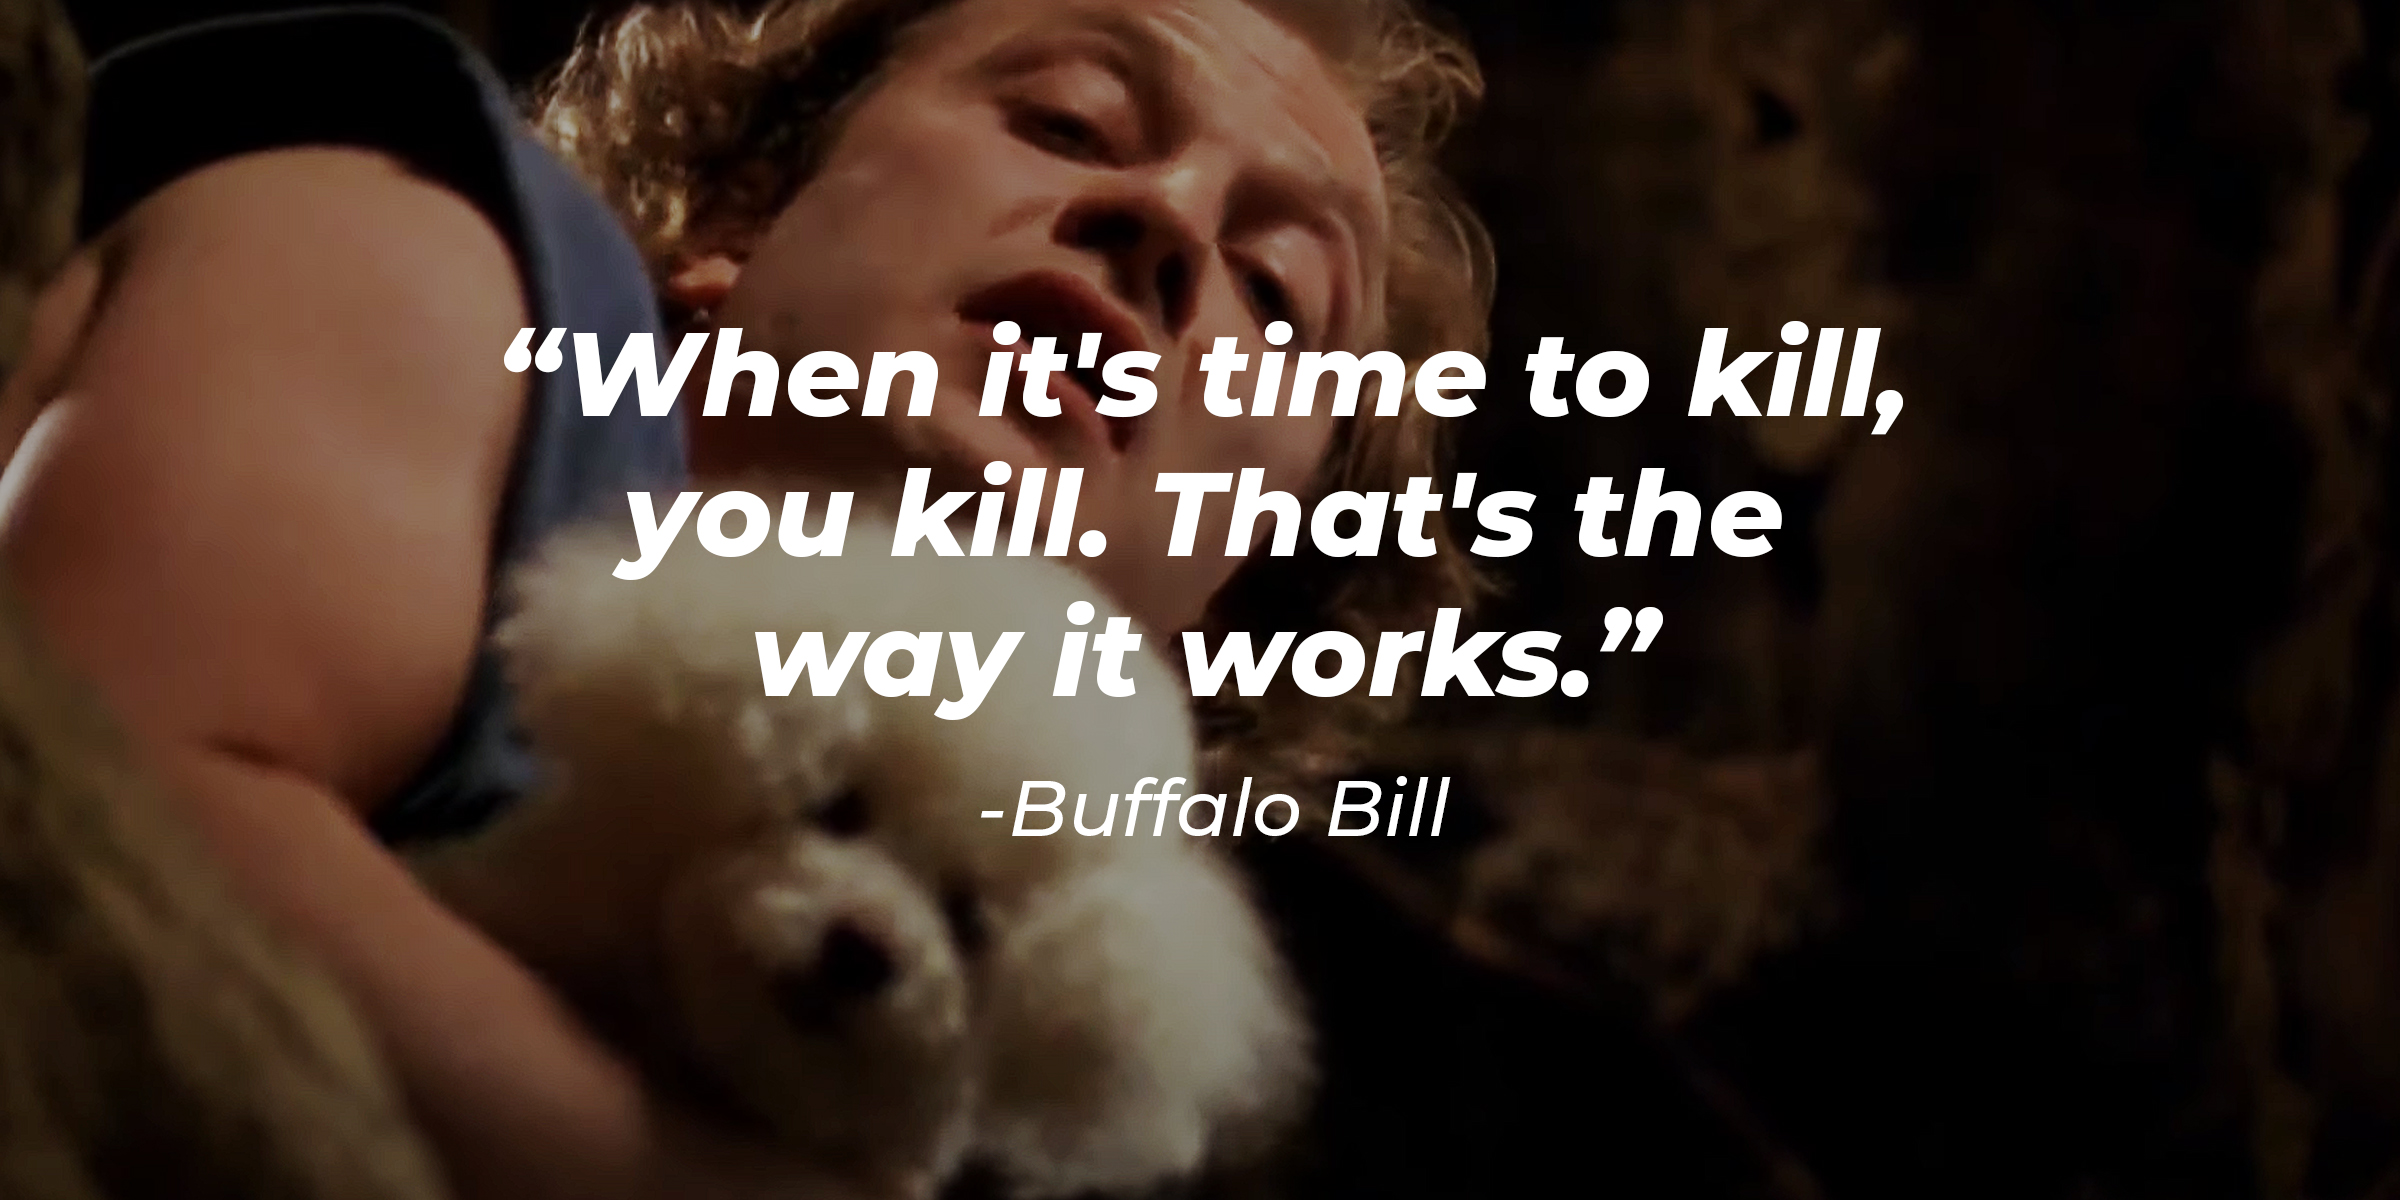 Buffalo Bill with his quote: "When it's time to kill, you kill. That's the way it works." | Source: Youtube/MGMStudios